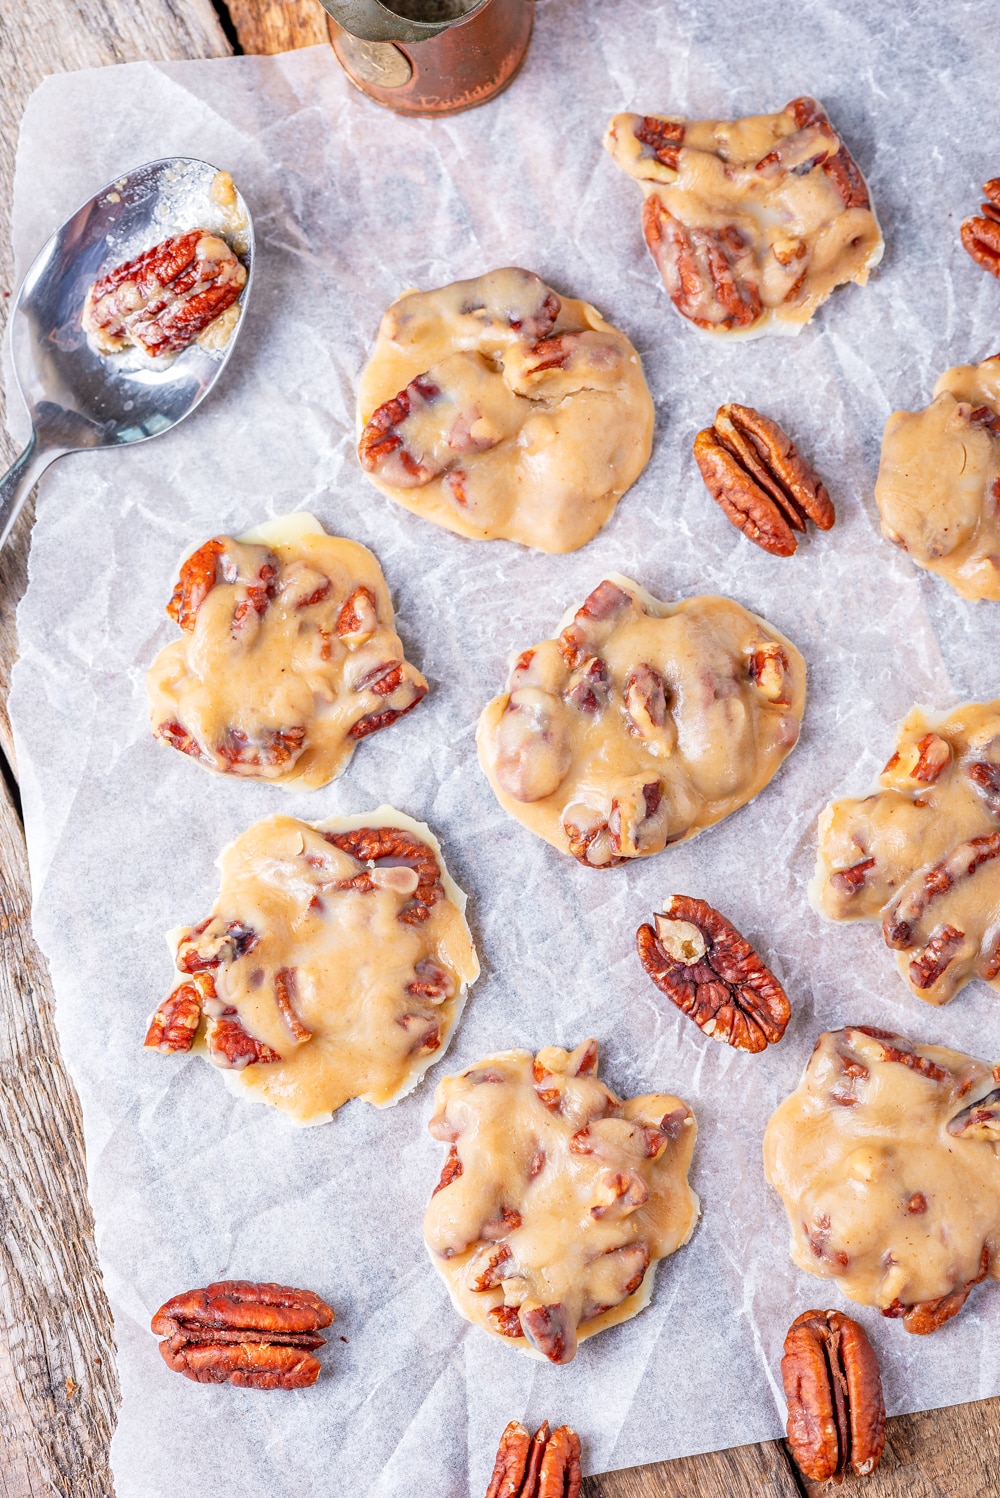 Pralines laid out on a sheet of parchment paper with raw pecans next to them.